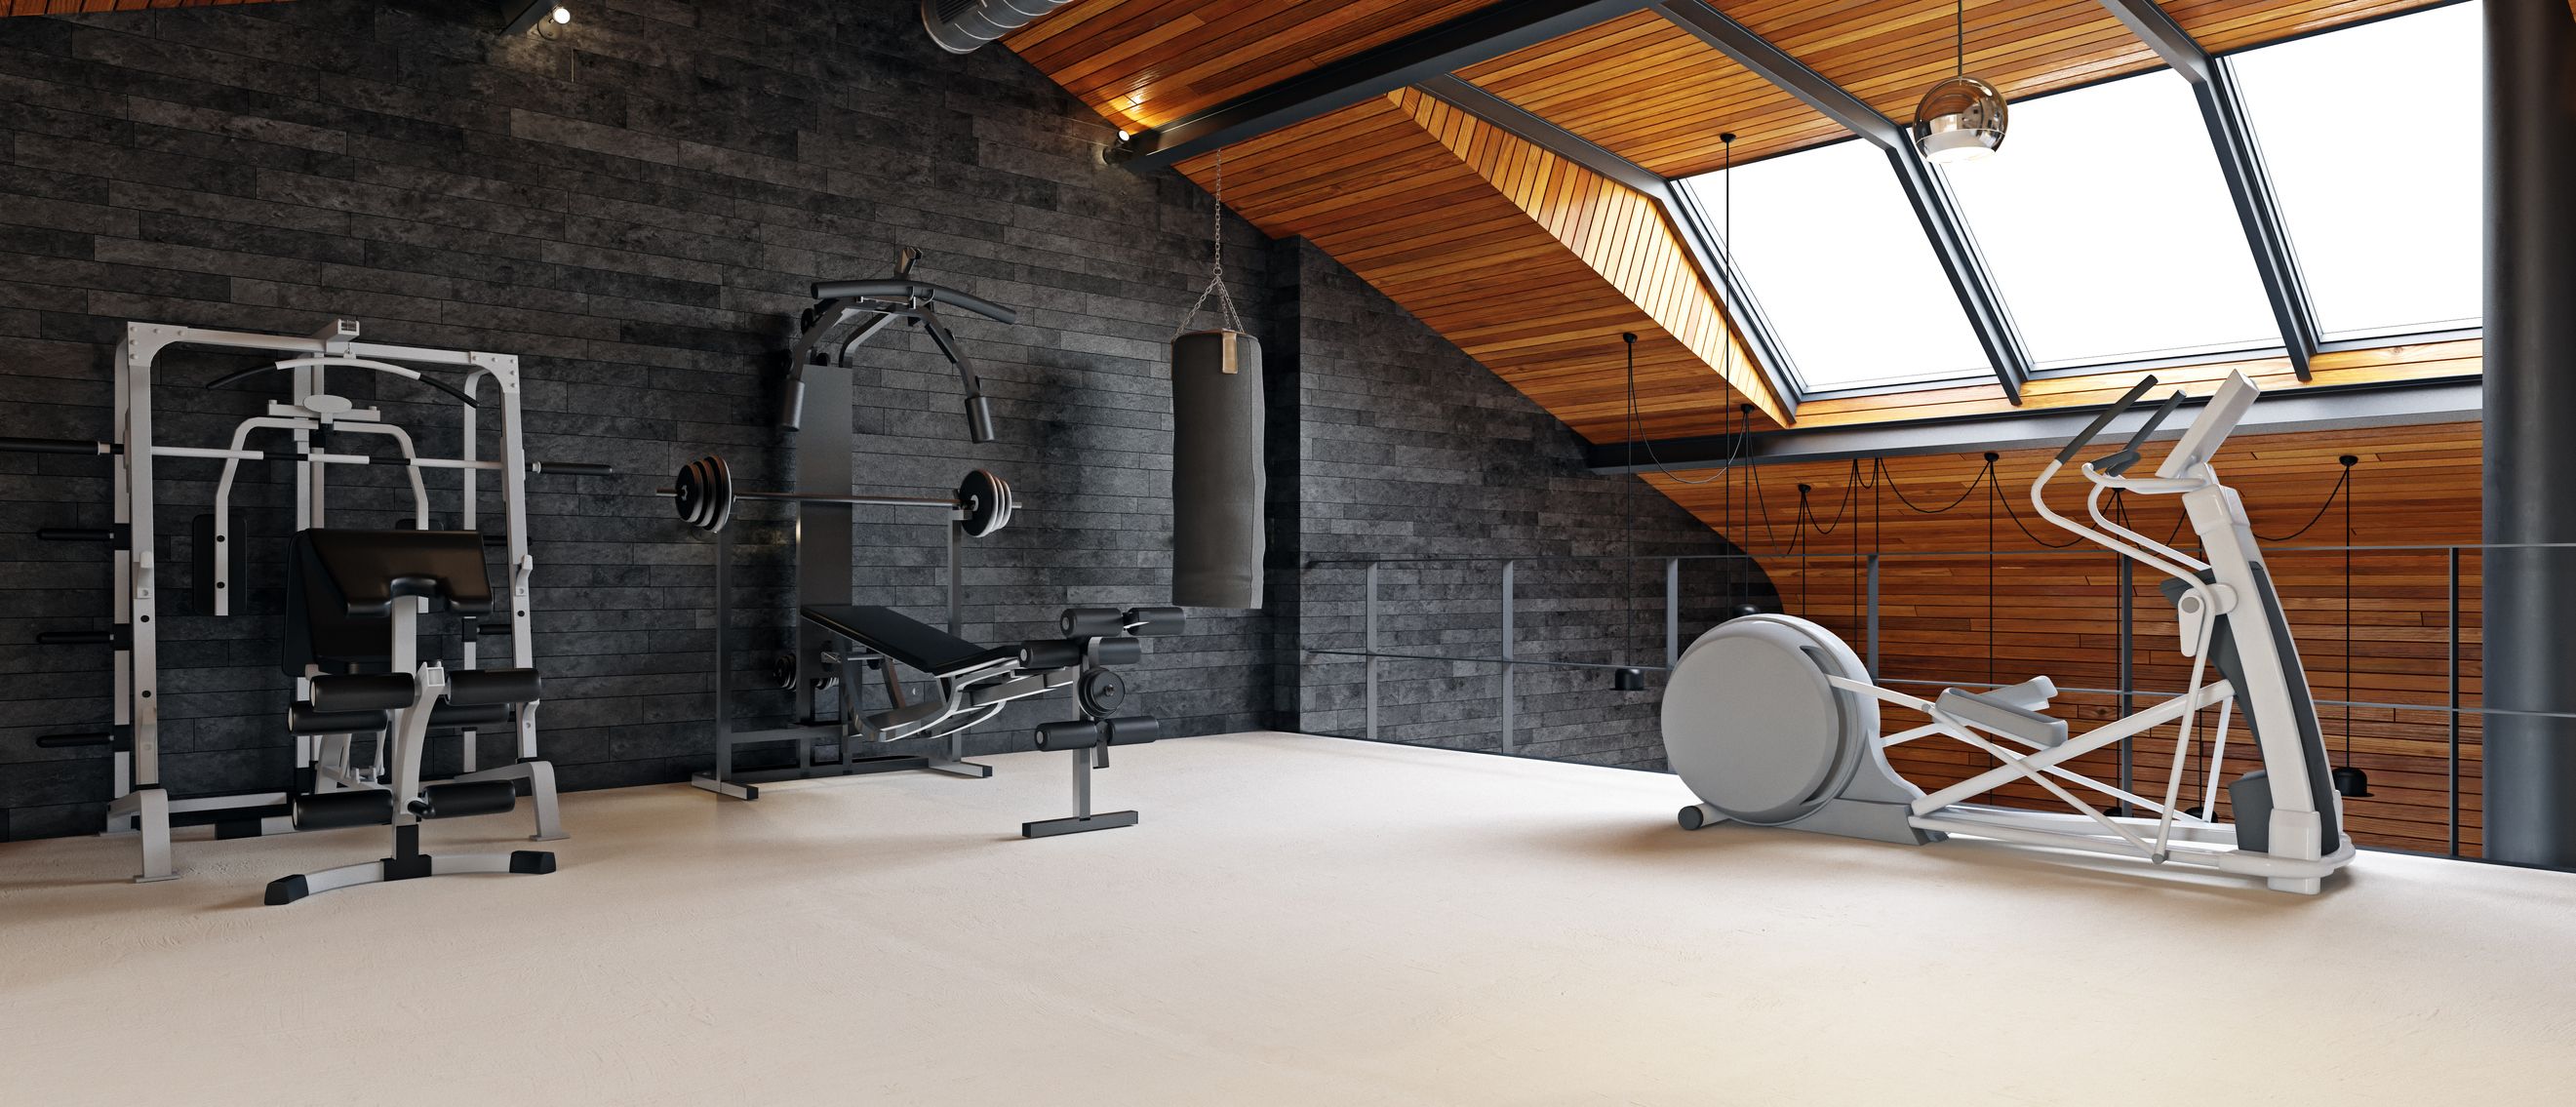 The 30 Best Pieces Of Equipment For Your Home Gym For 2019